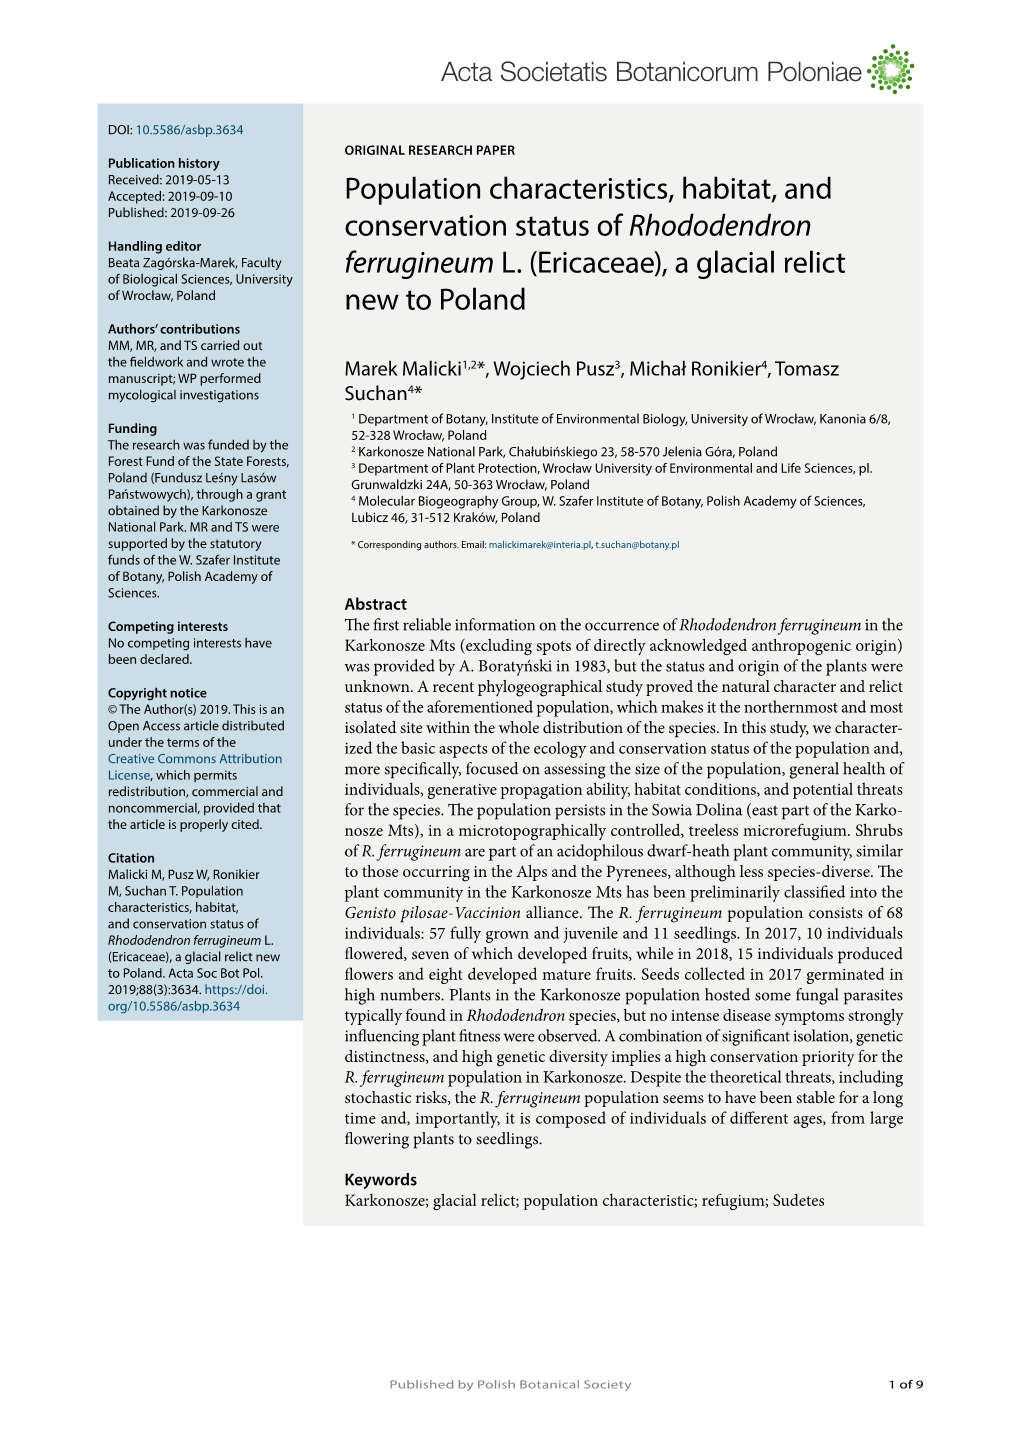 Population Characteristics, Habitat, and Conservation Status of Rhododendron Ferrugineum L. (Ericaceae), a Glacial Relict New To